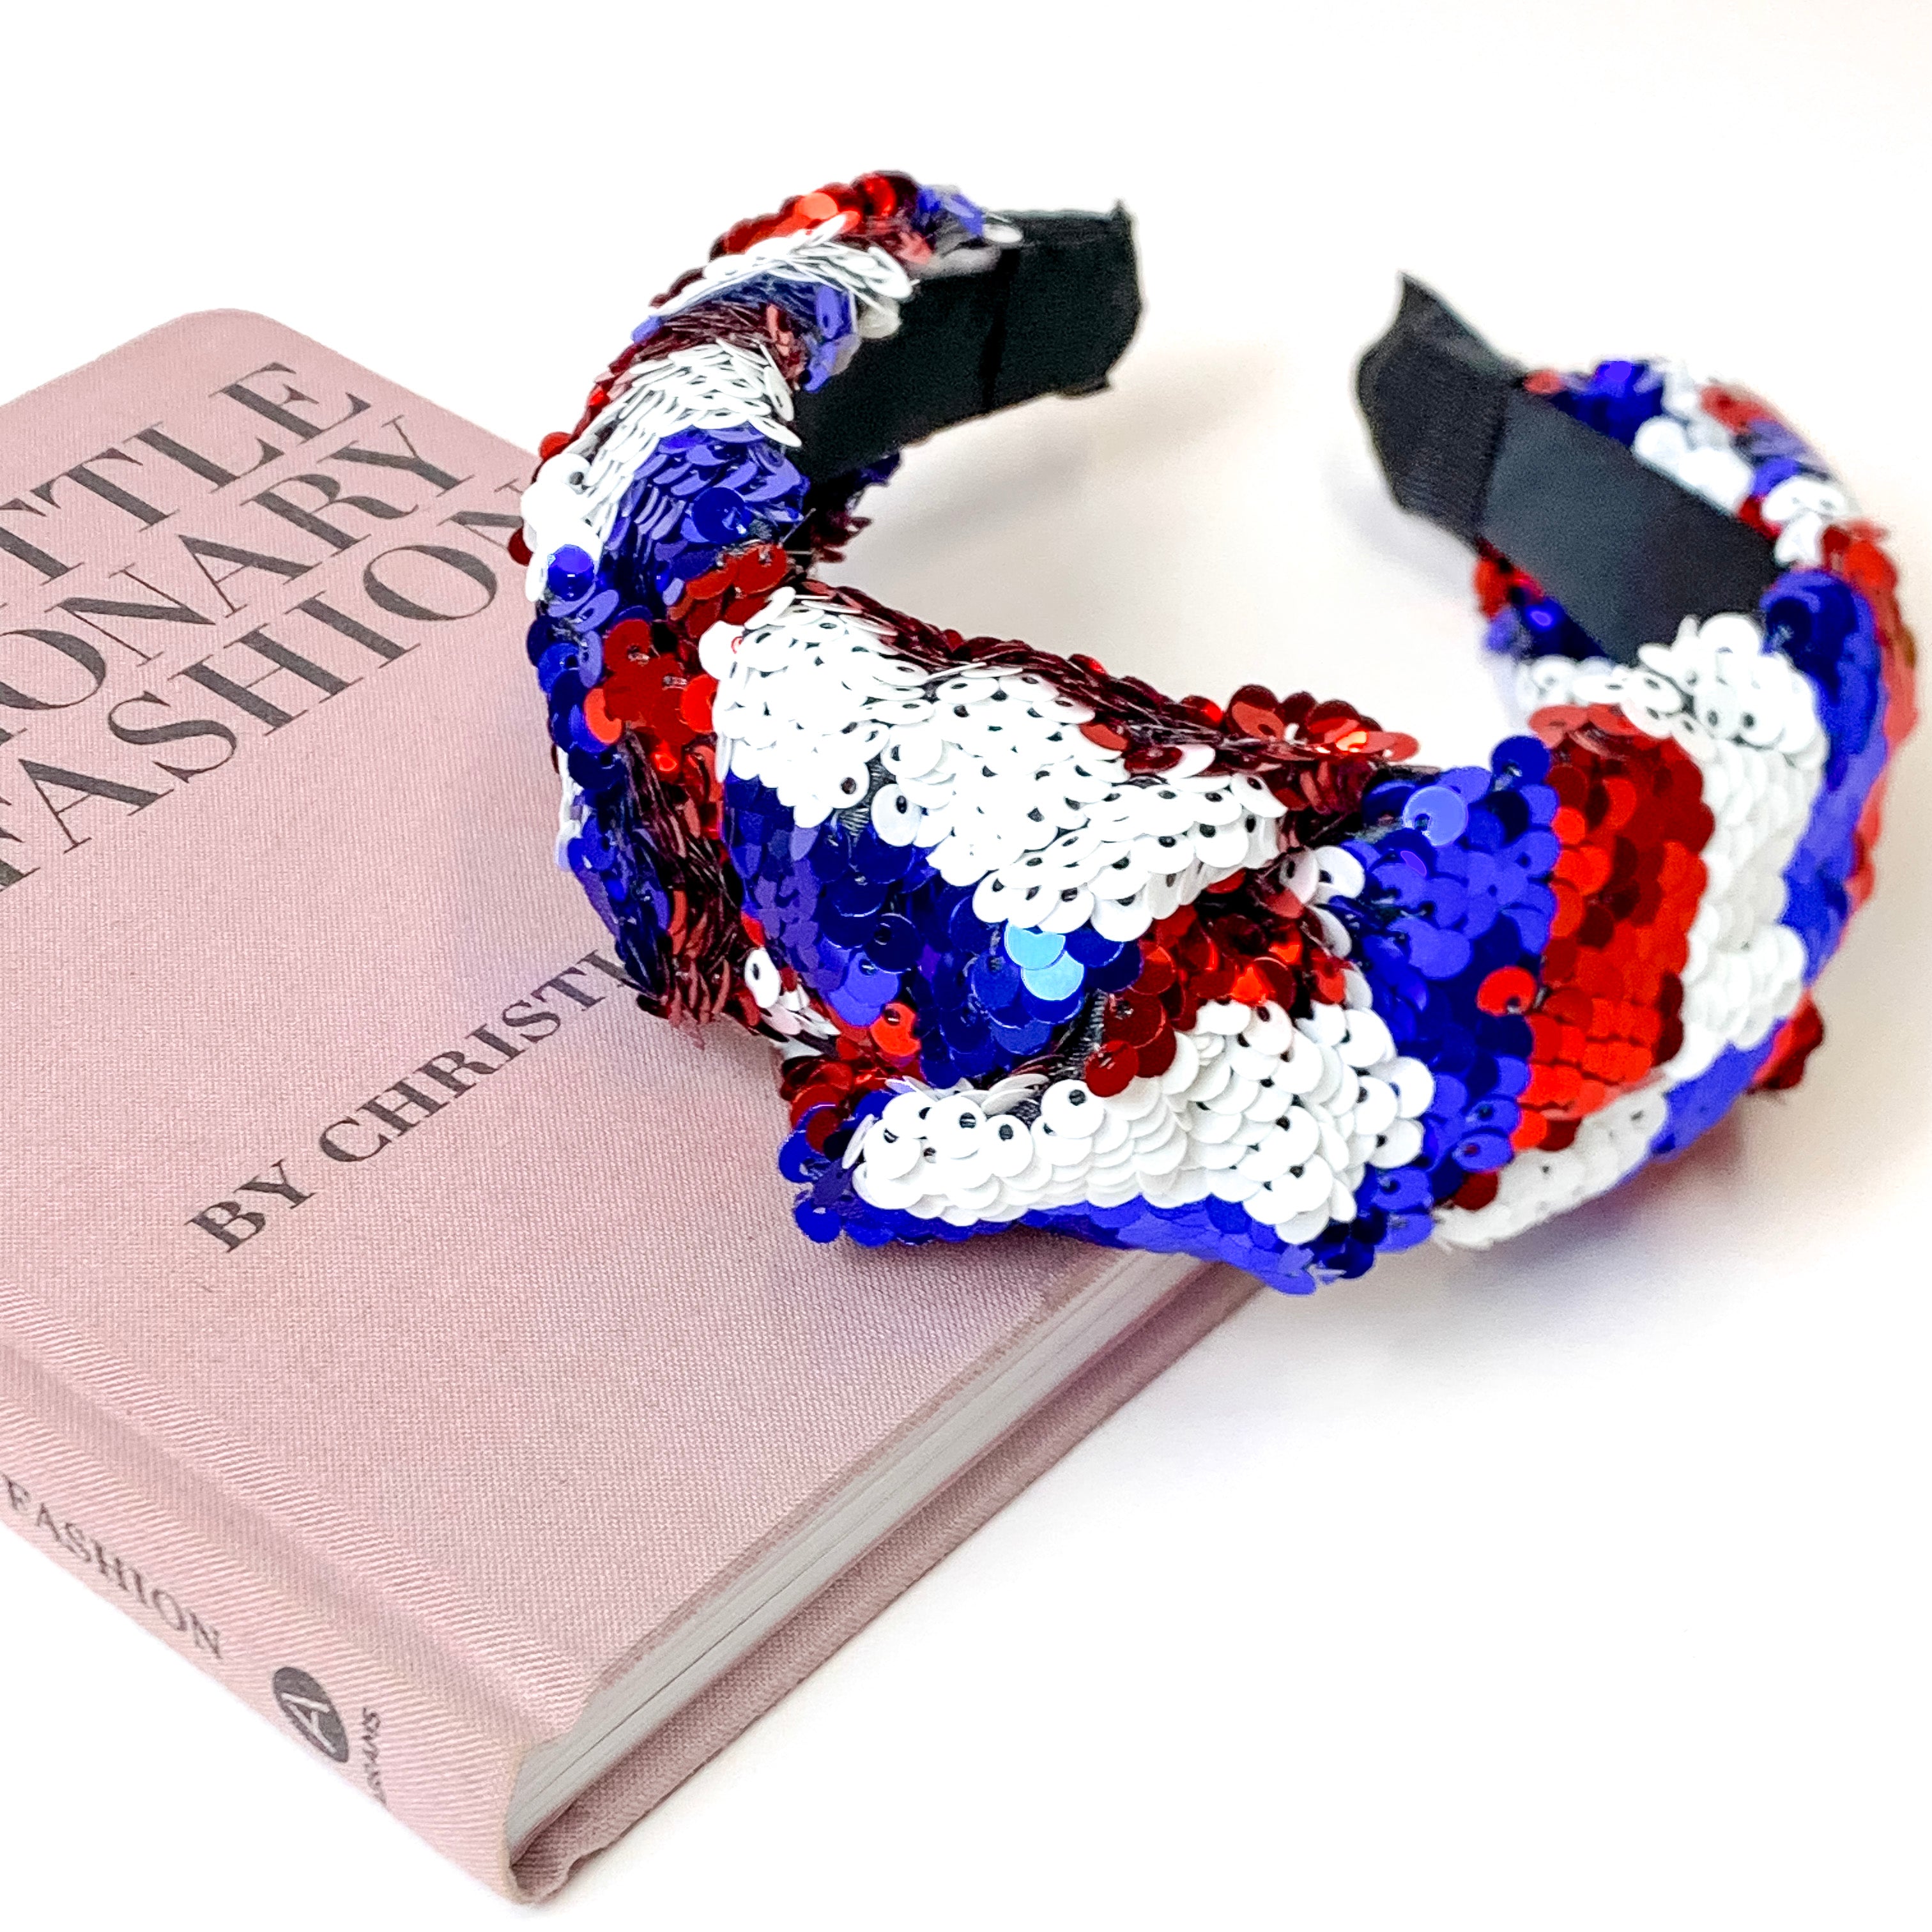 Sequin Knotted Headband in Red/White/Blue - Giddy Up Glamour Boutique